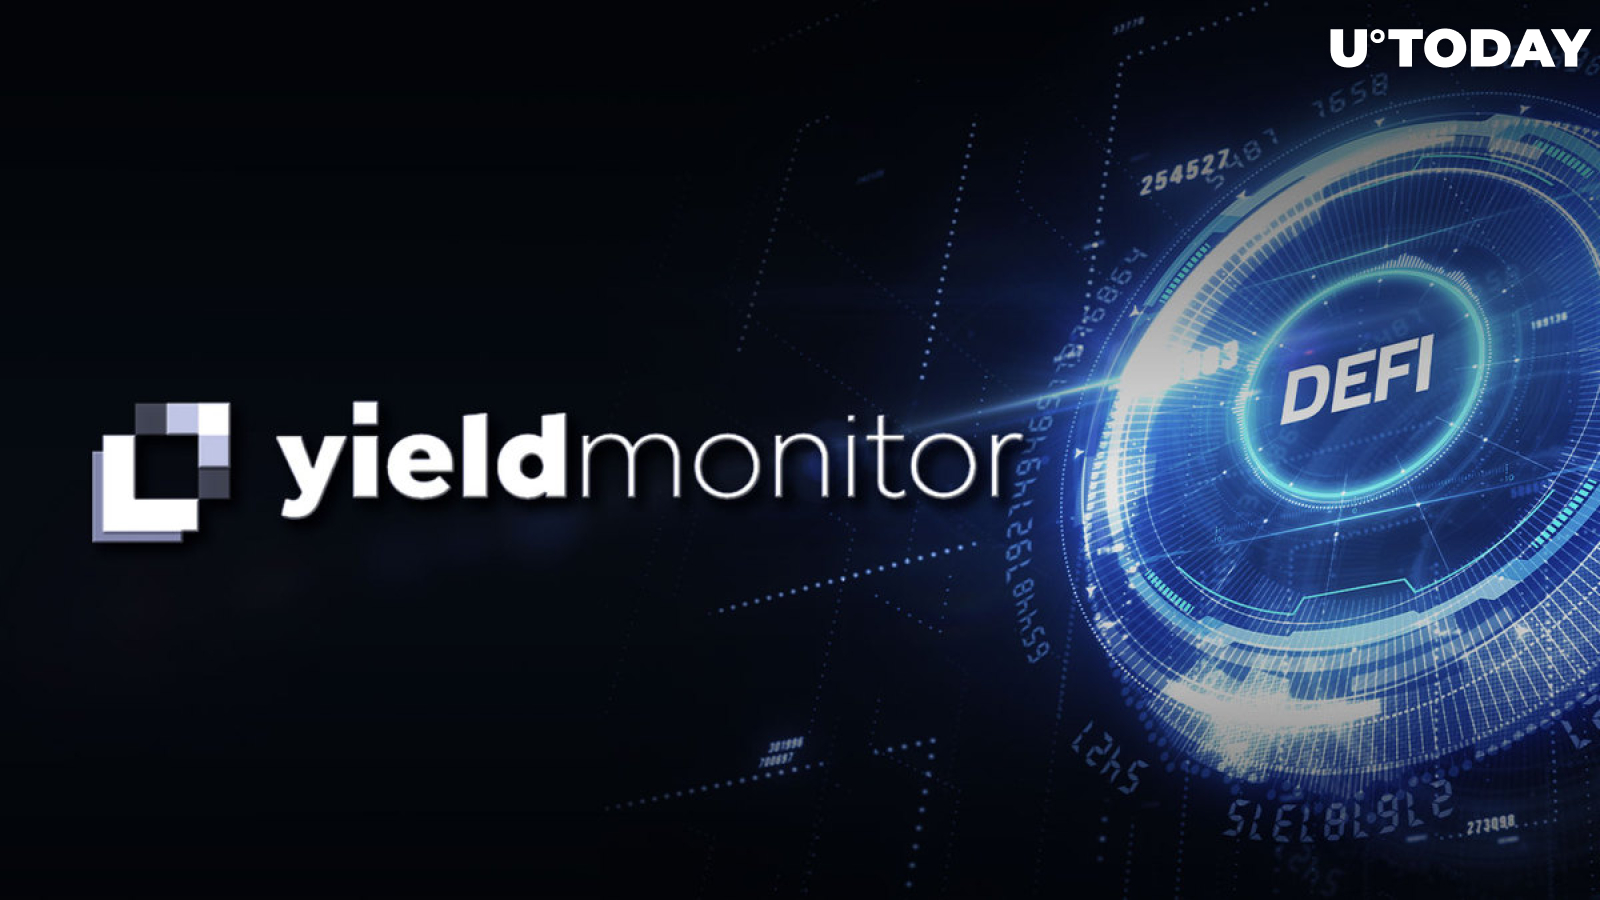 Yield Monitor Integrates DeFiChain to Provide Insights into On-Chain Metrics